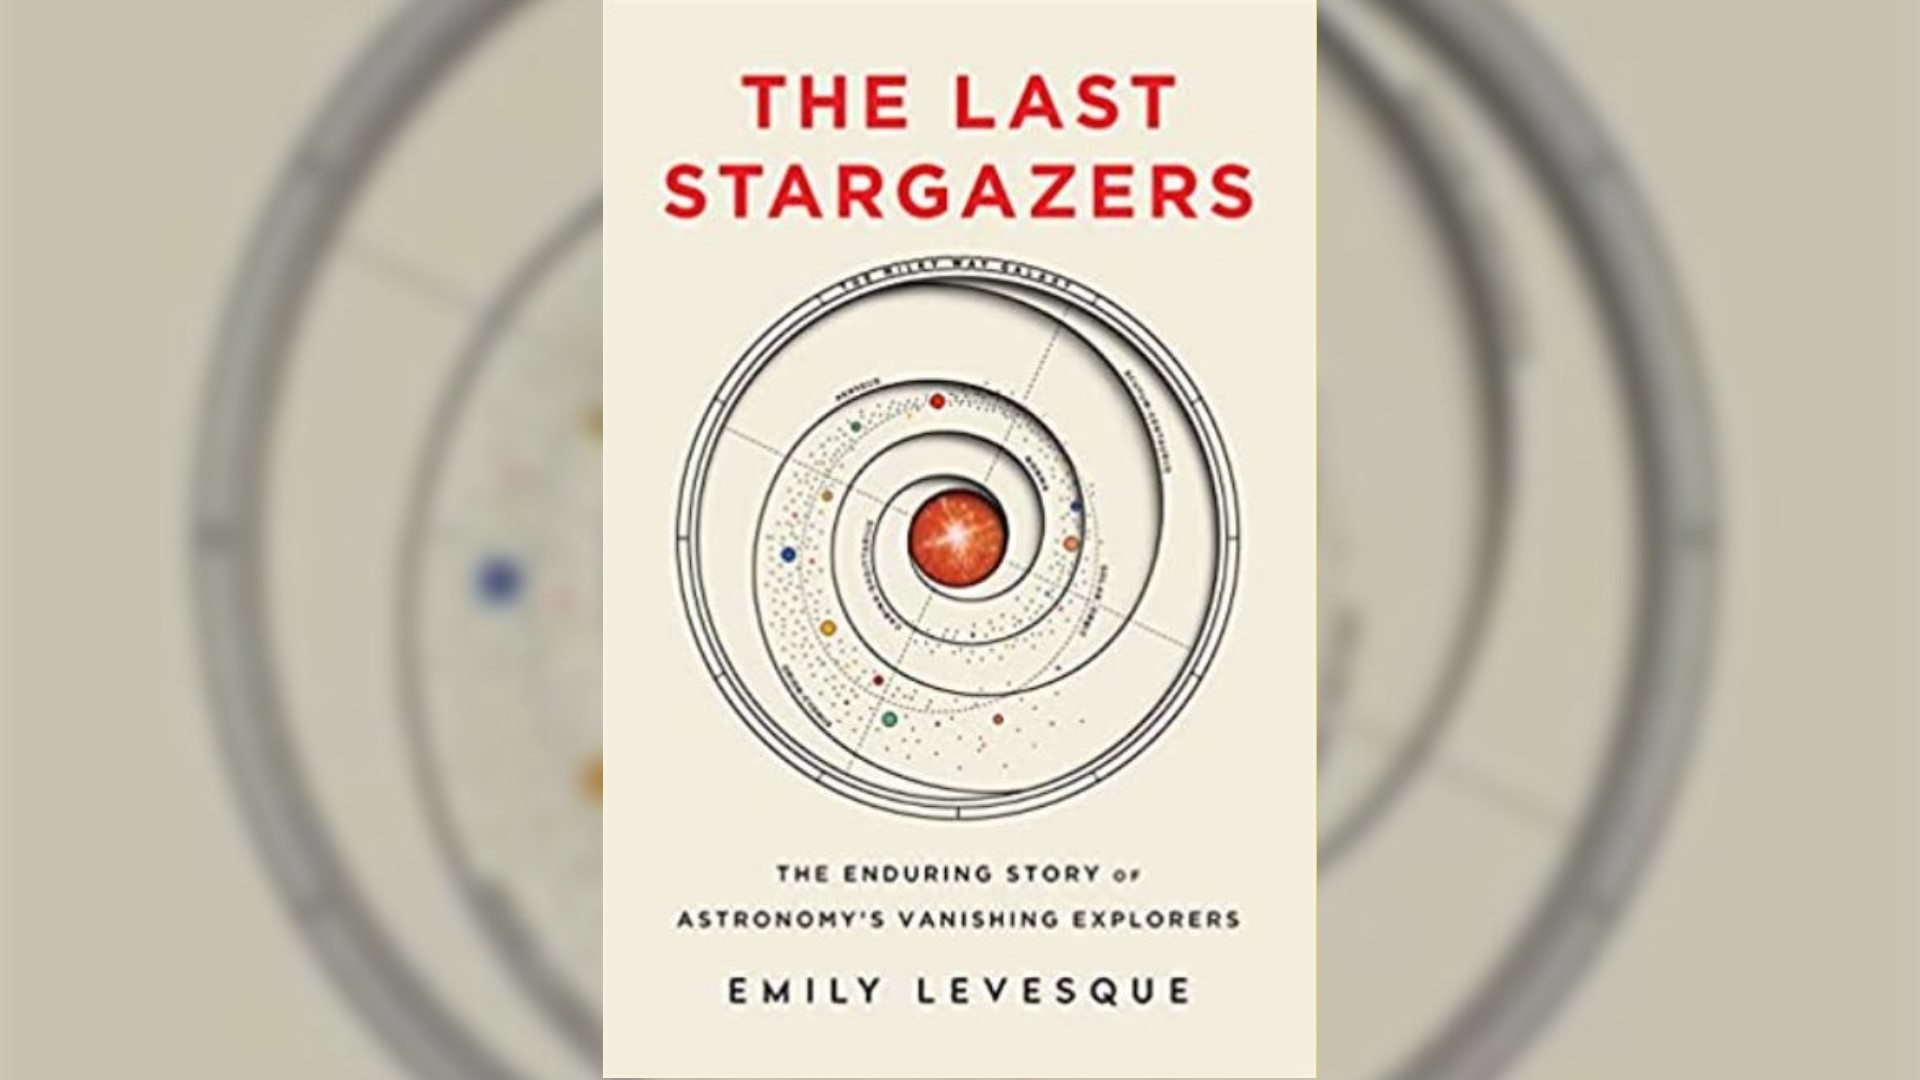 University of Washington professor and astronomer Emily Levesque joined New Day NW to talk about her book "The Last Stargazers." #newdaynw